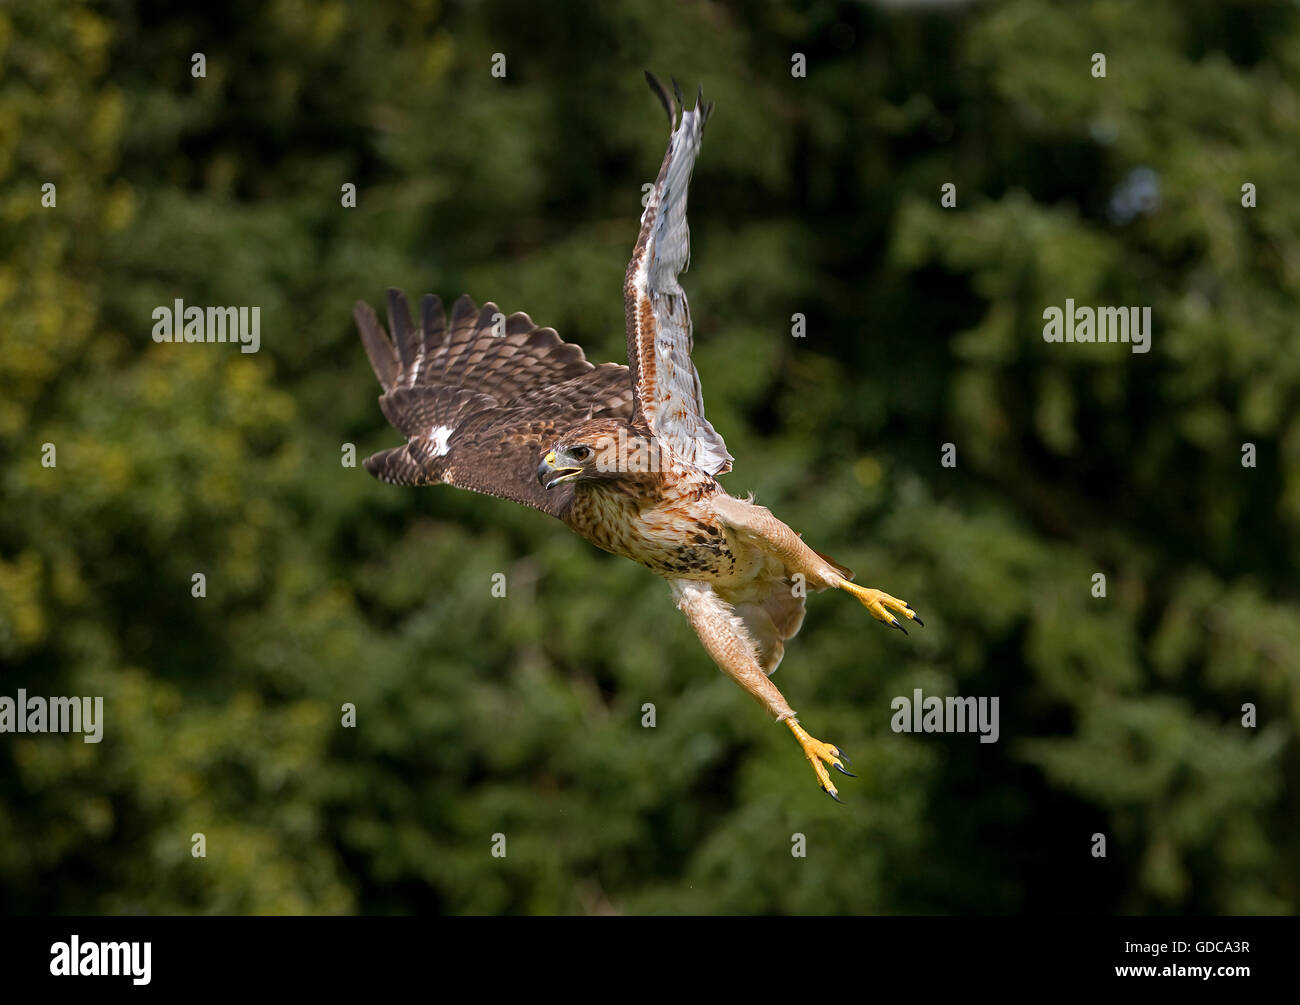 RED-TAILED HAWK buteo jamaicensis, ADULT IN FLIGHT Stock Photo